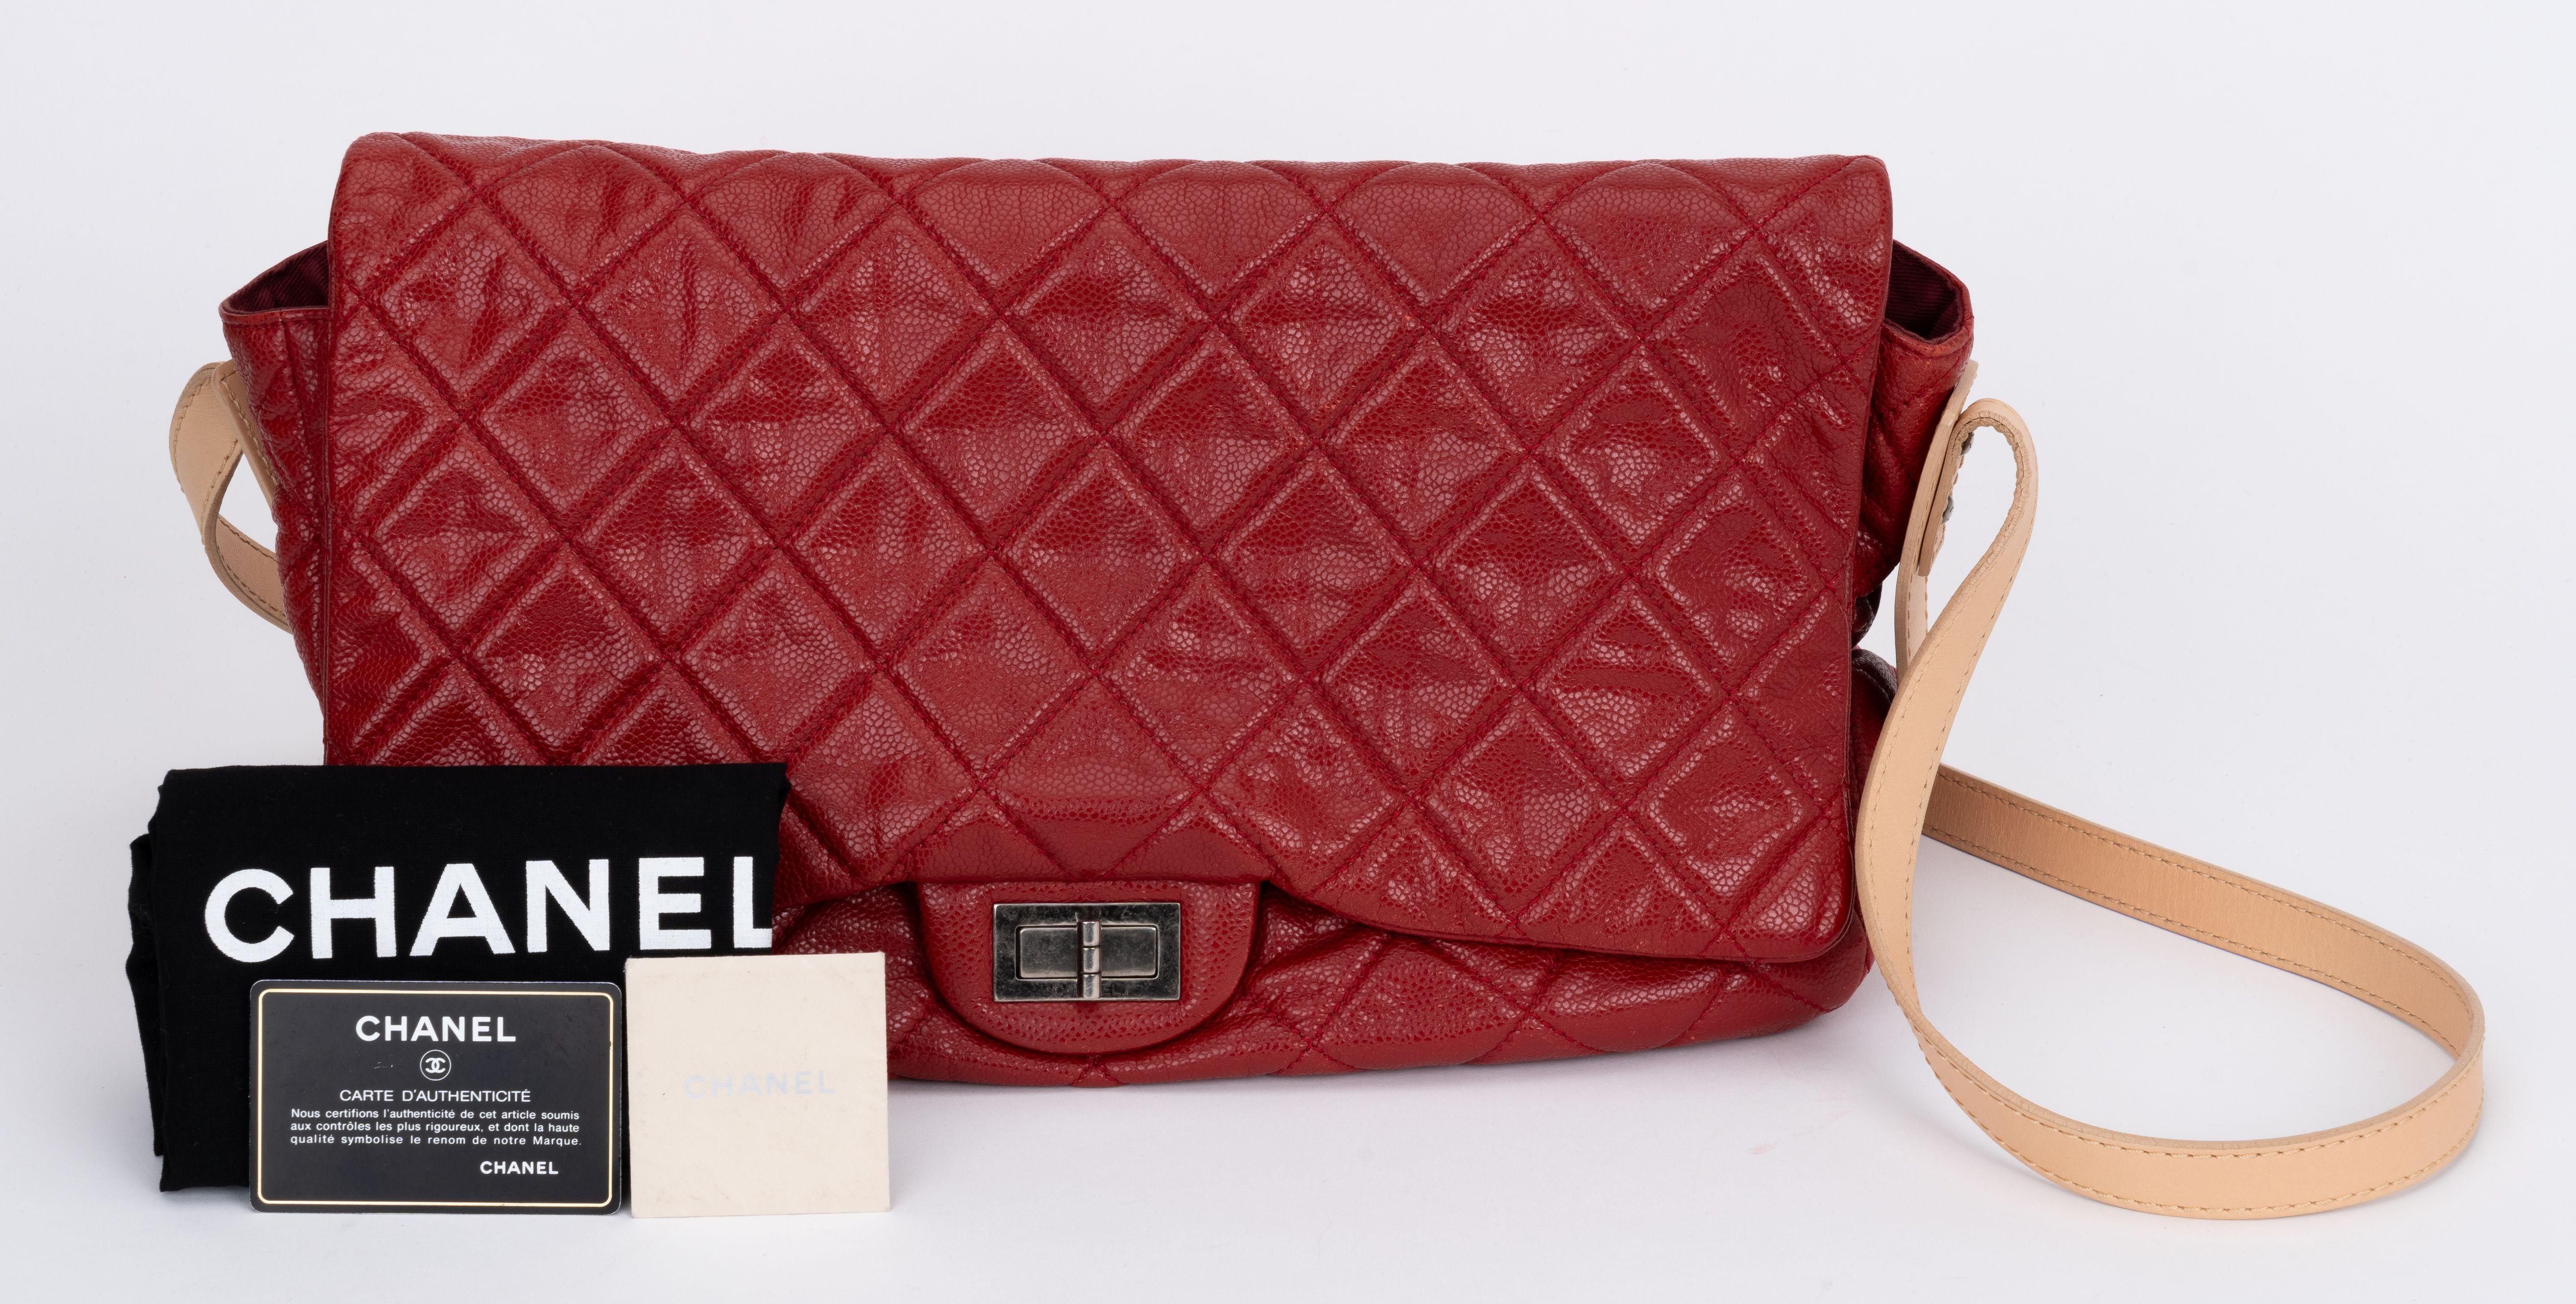 Chanel Red Caviar Reissue Cross Body Bag For Sale 4